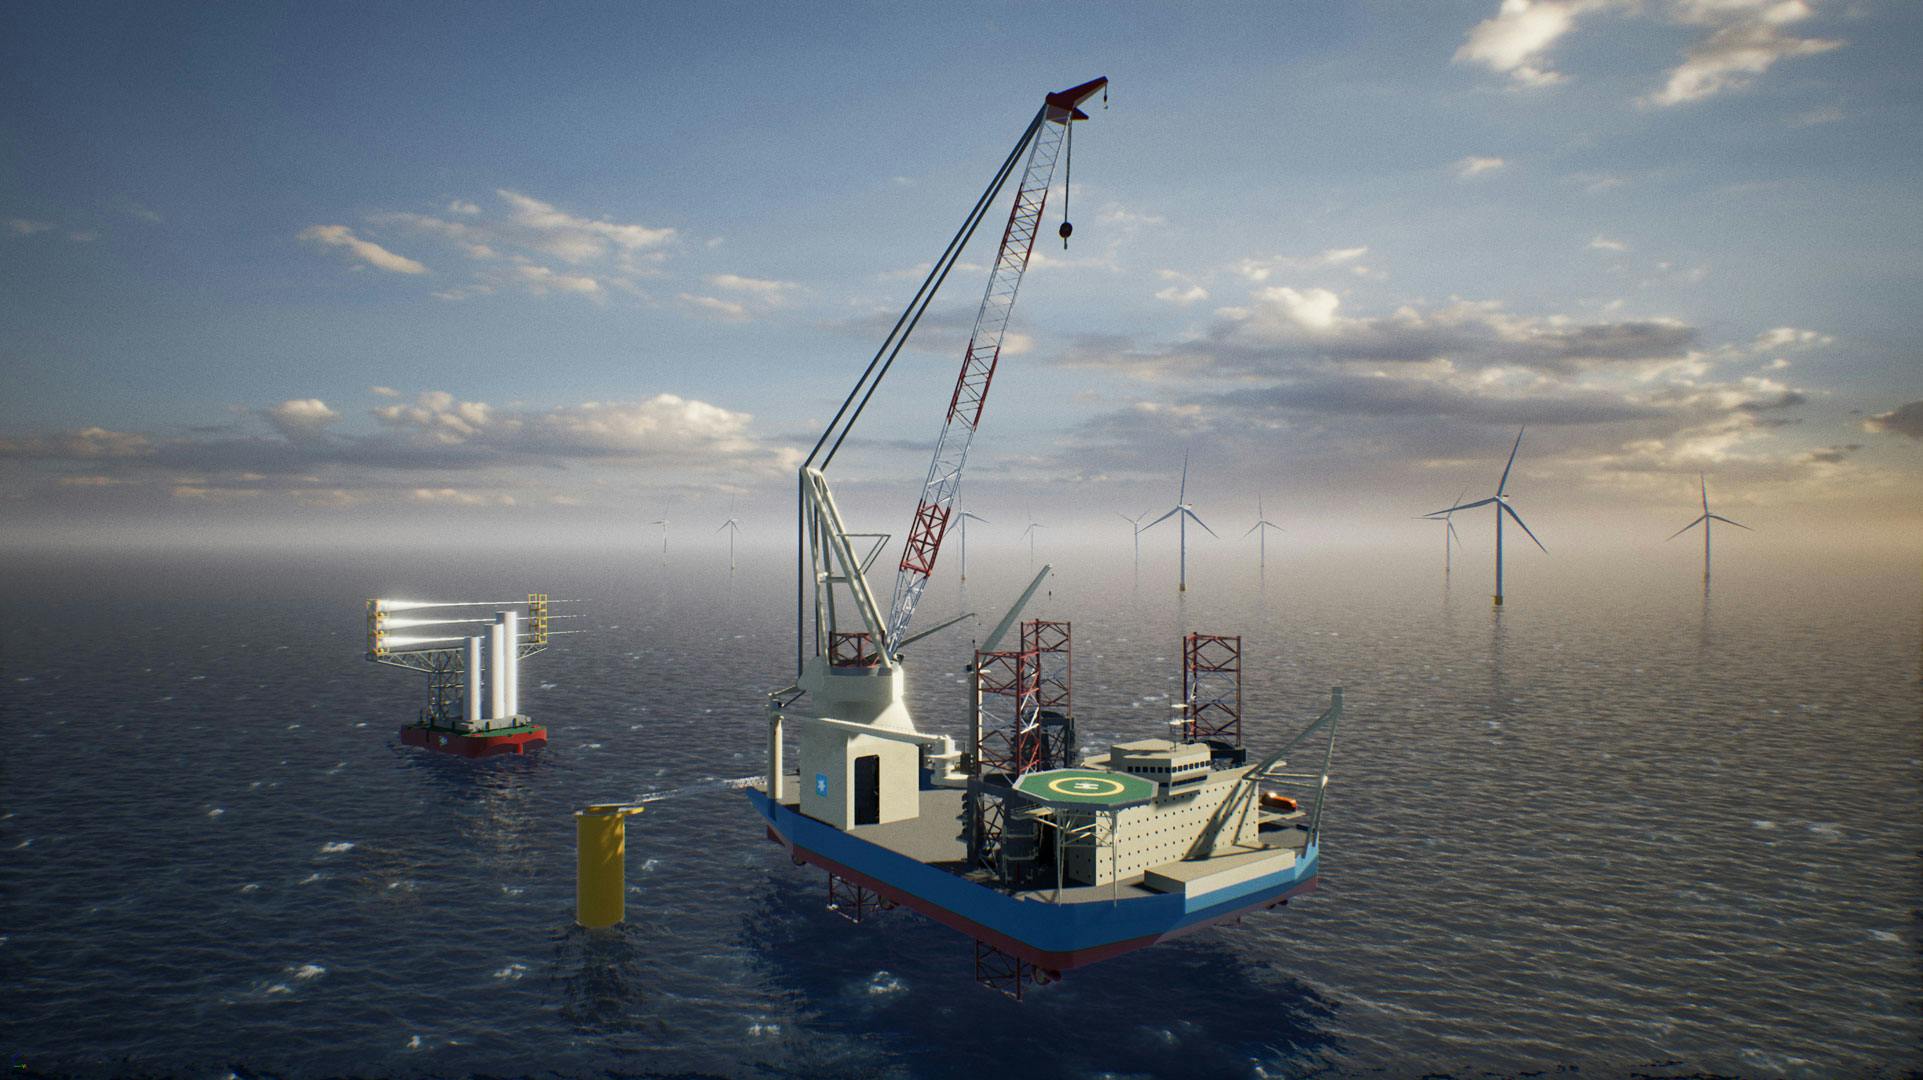 Render of a Maersk supply service wind installation vessel at sea